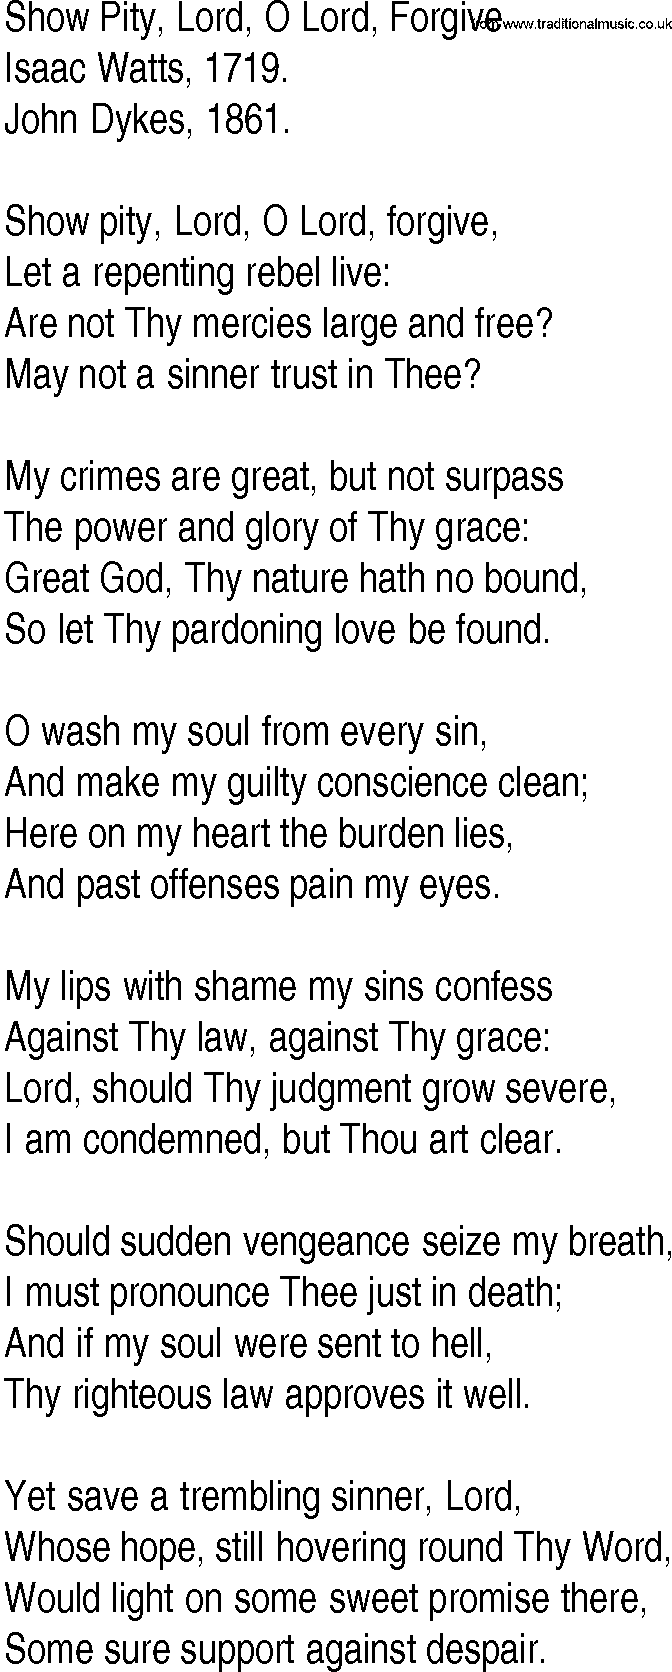 Hymn and Gospel Song: Show Pity, Lord, O Lord, Forgive by Isaac Watts lyrics